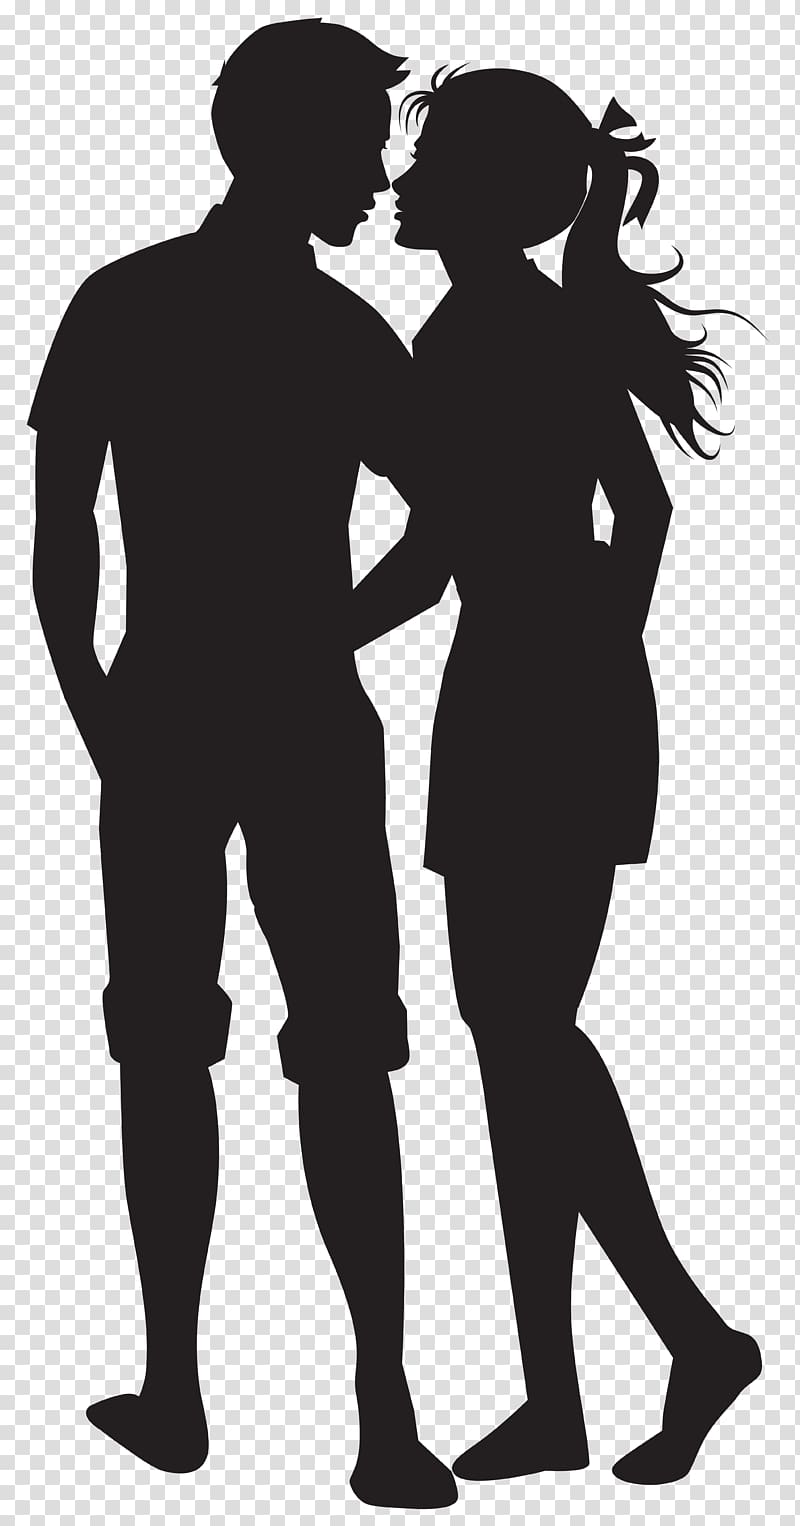 man and woman standing illustration, couple , Couple Silhouettes transparent background PNG clipart